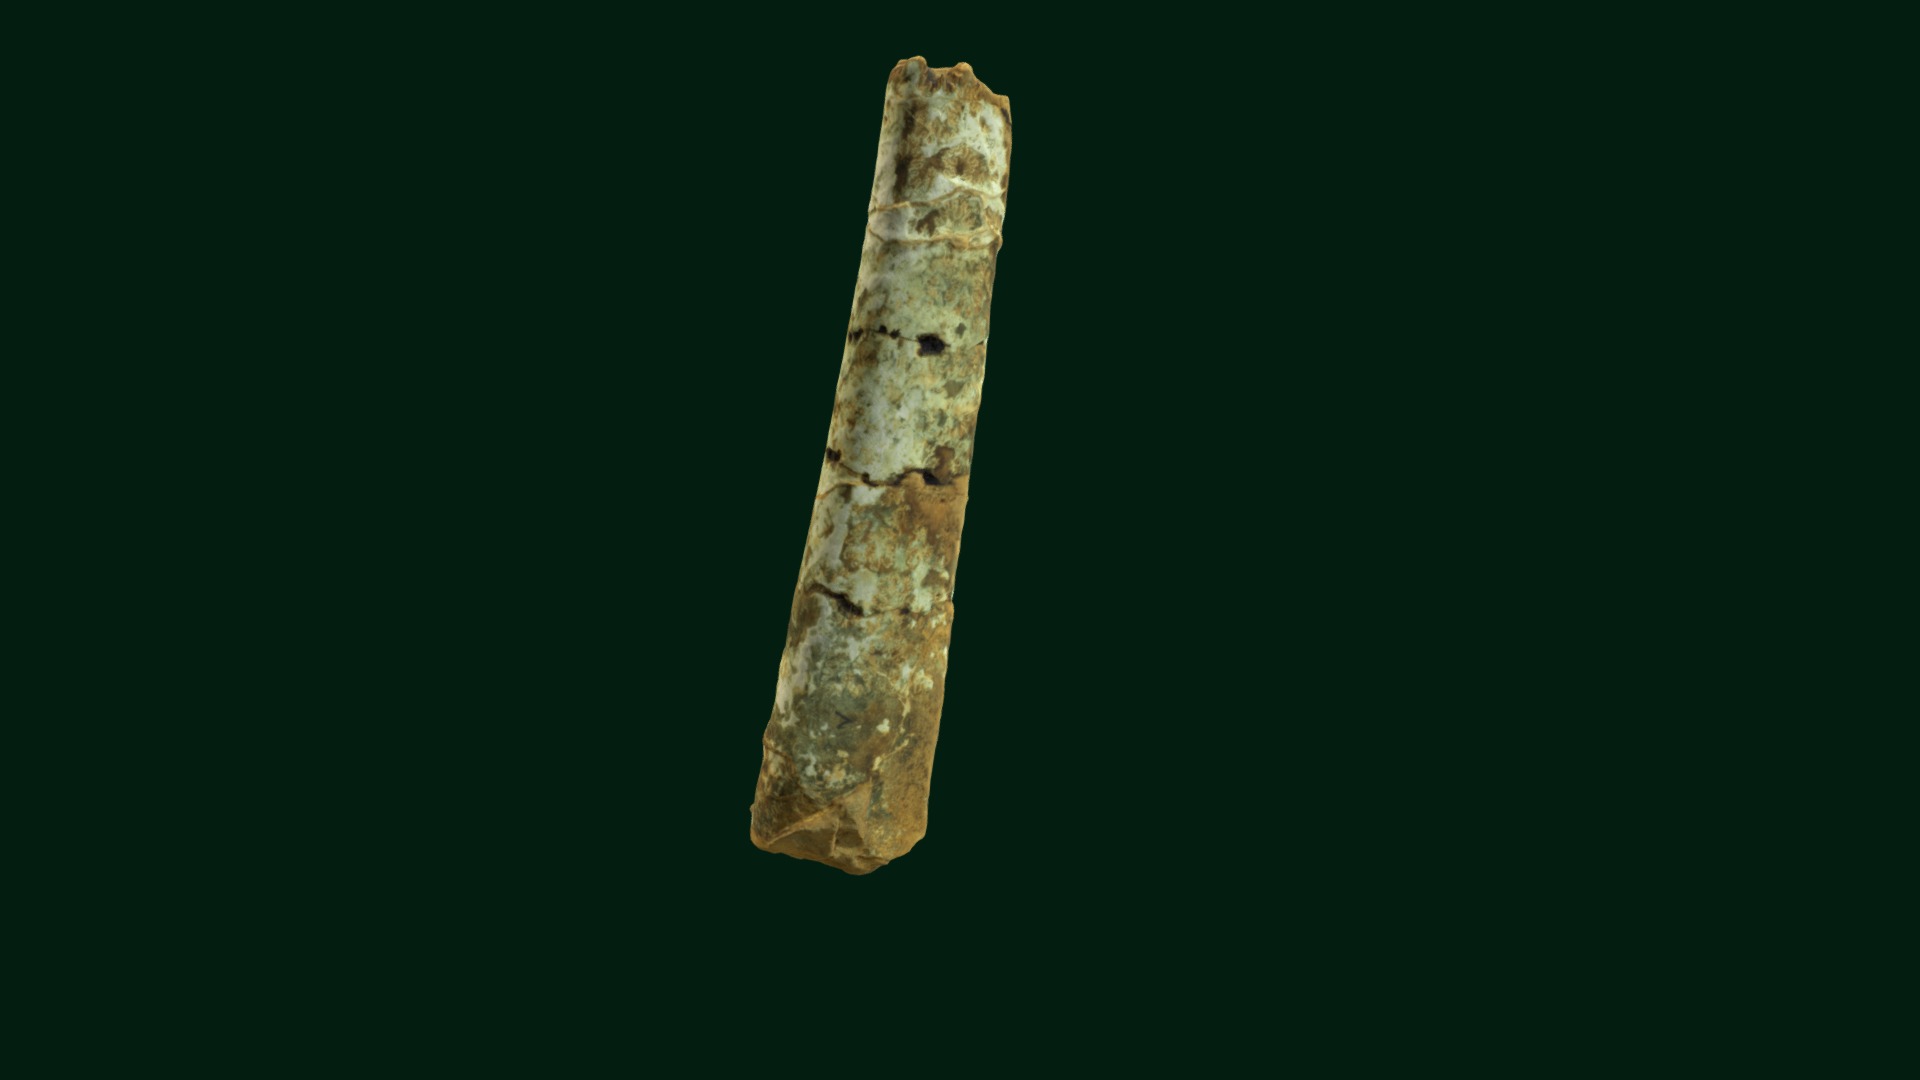 3D model Baculites gregoryensis D1920-1 Niobrara Cnty, WY - This is a 3D model of the Baculites gregoryensis D1920-1 Niobrara Cnty, WY. The 3D model is about a piece of wood with a hole in it.